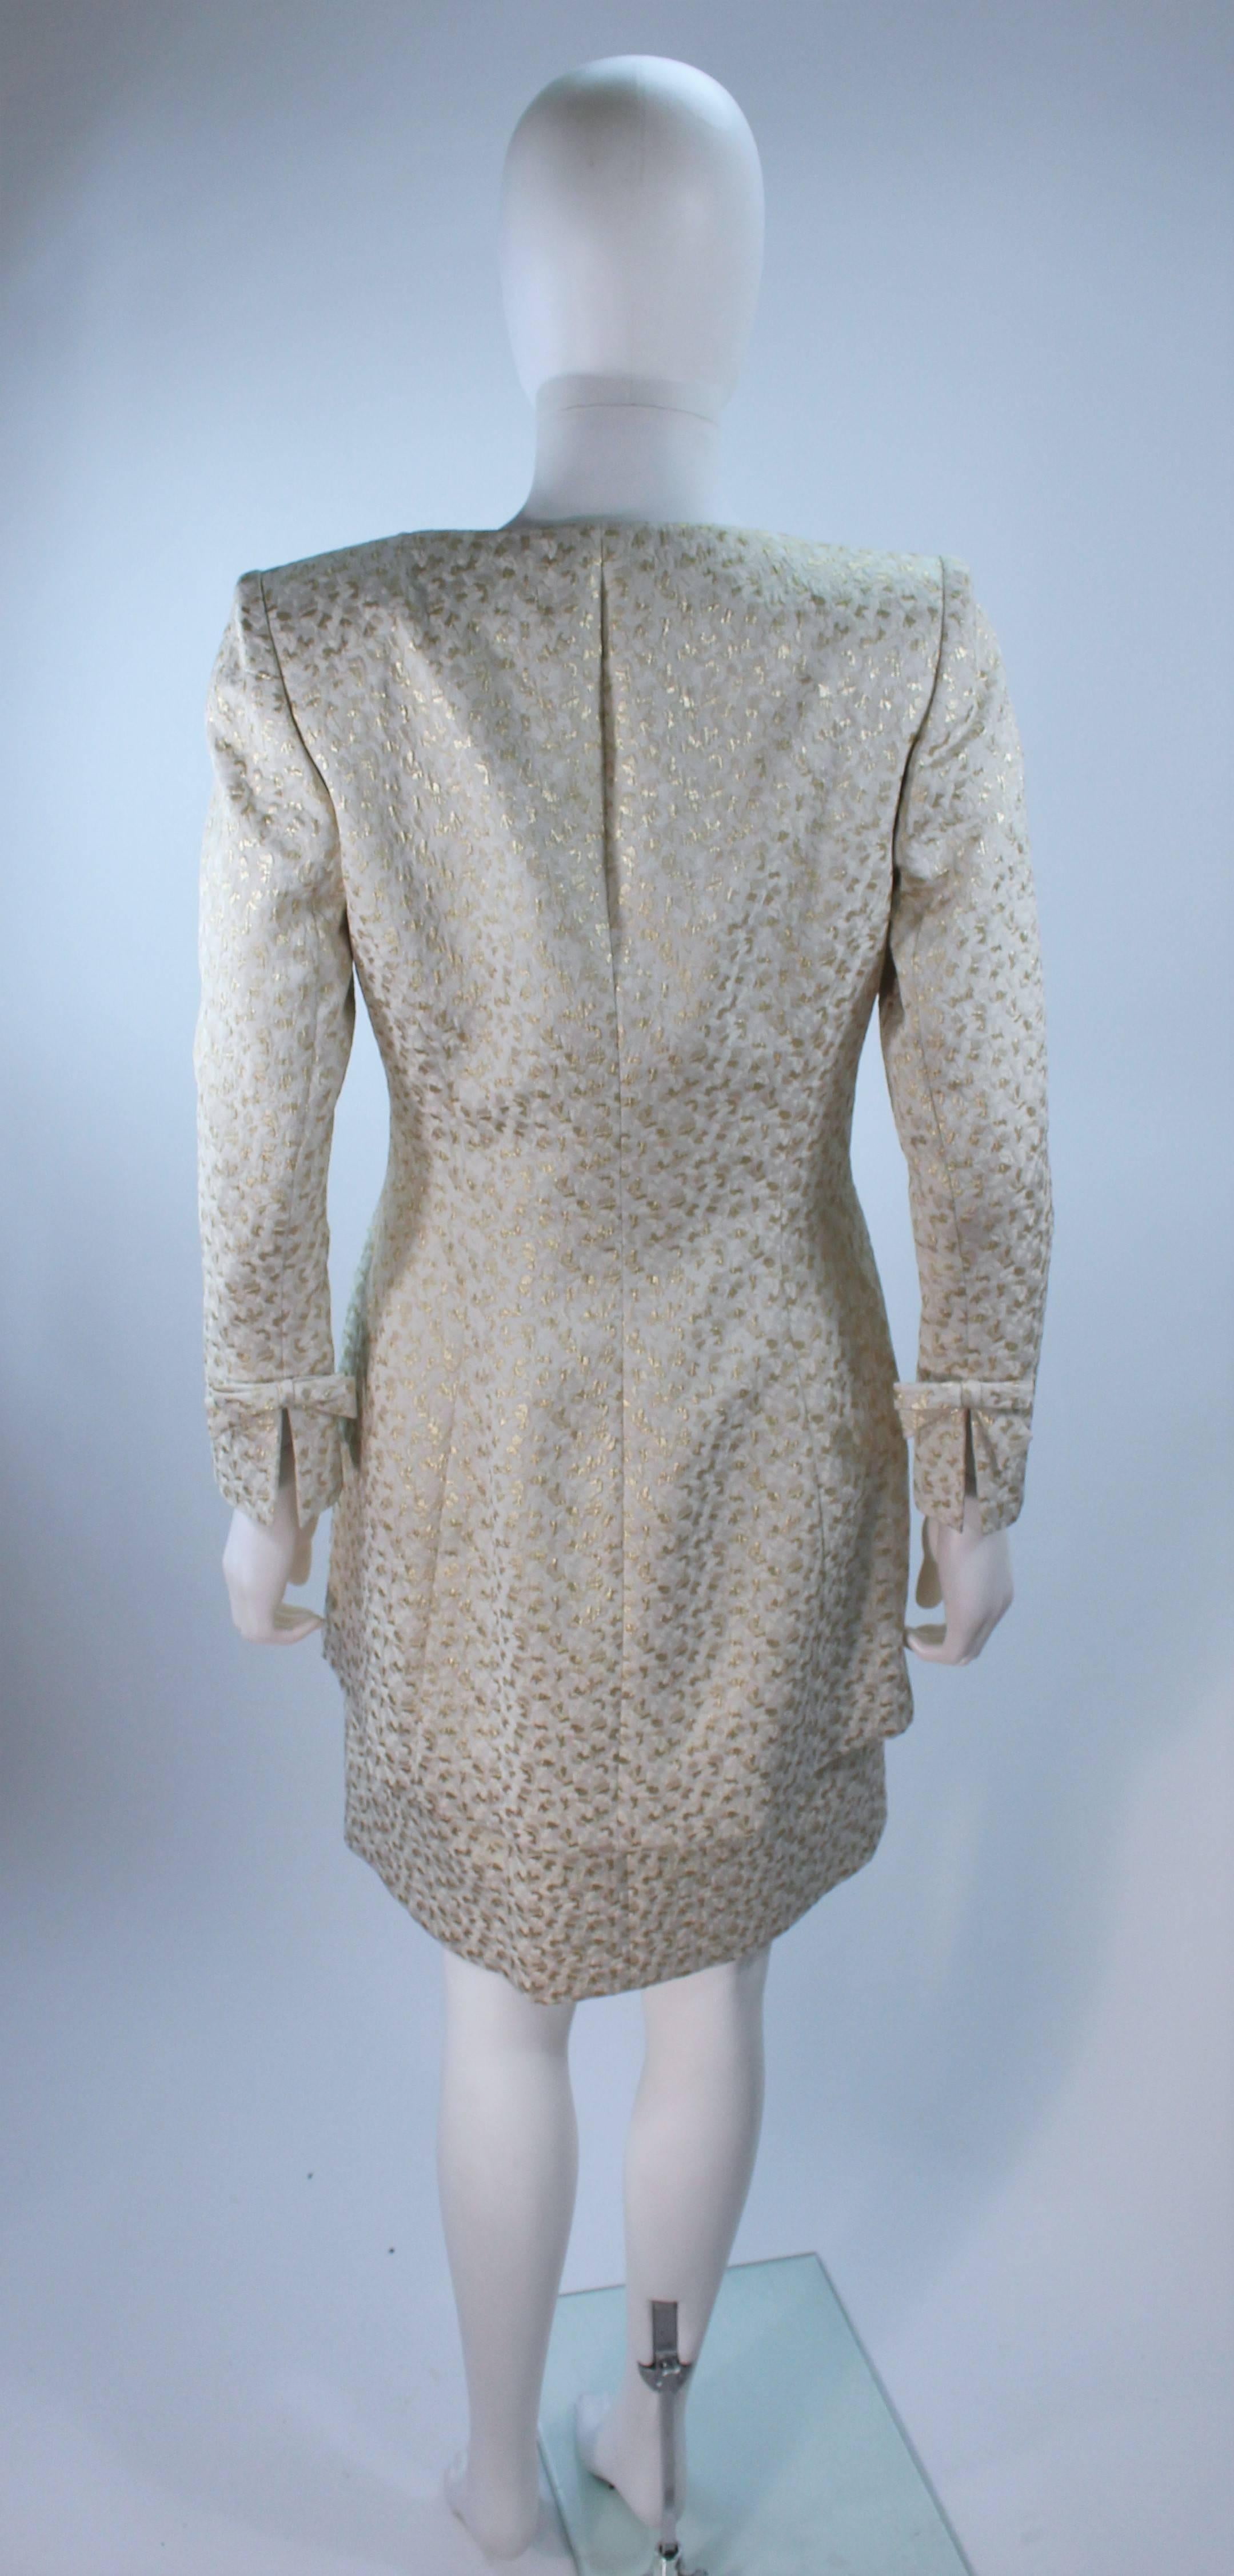 TRAVILLA 2pc White and Gold Metallic Brocade Silk Dress and Coat Ensemble Size 8 In Excellent Condition For Sale In Los Angeles, CA